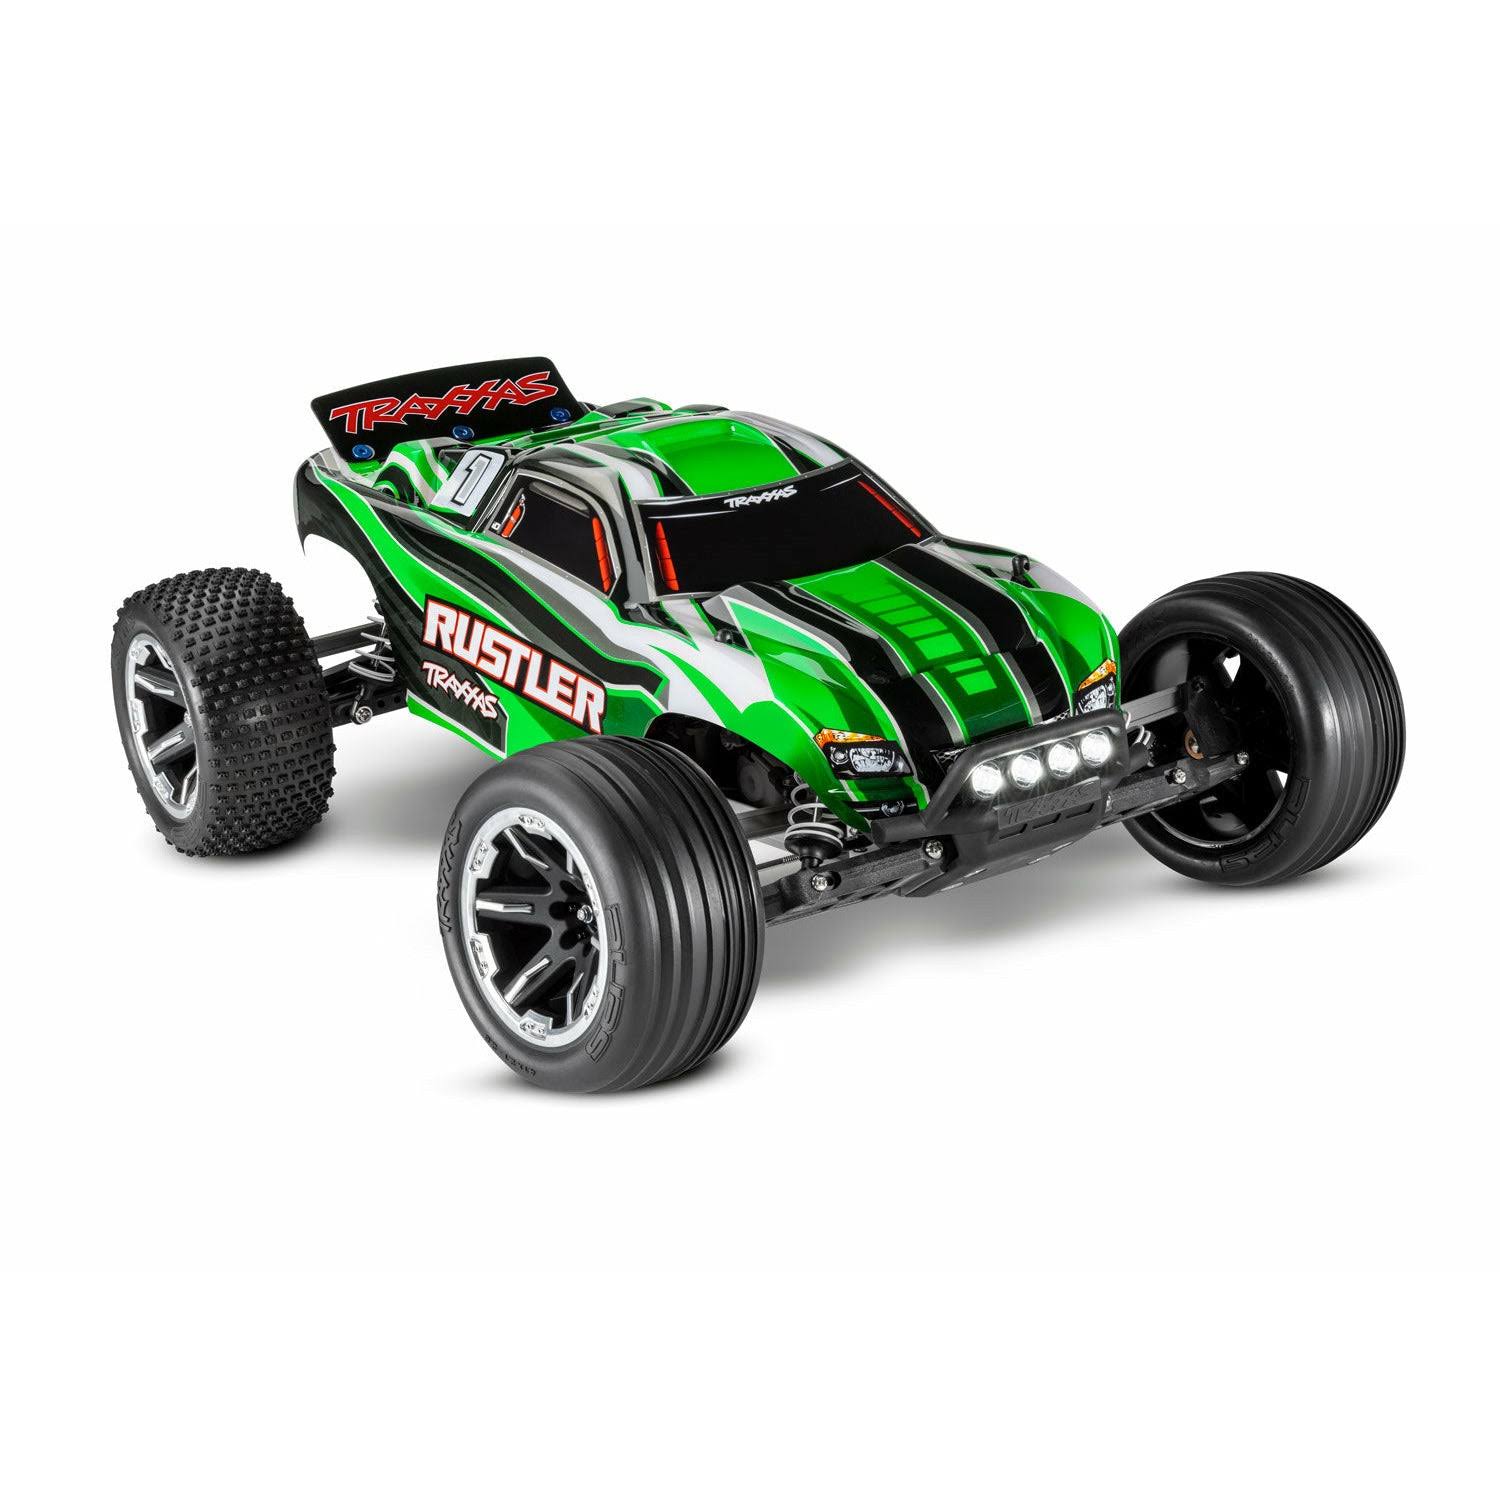 Traxxas Rustler 1/10 RTR with LED Lights, Battery and charger. Green